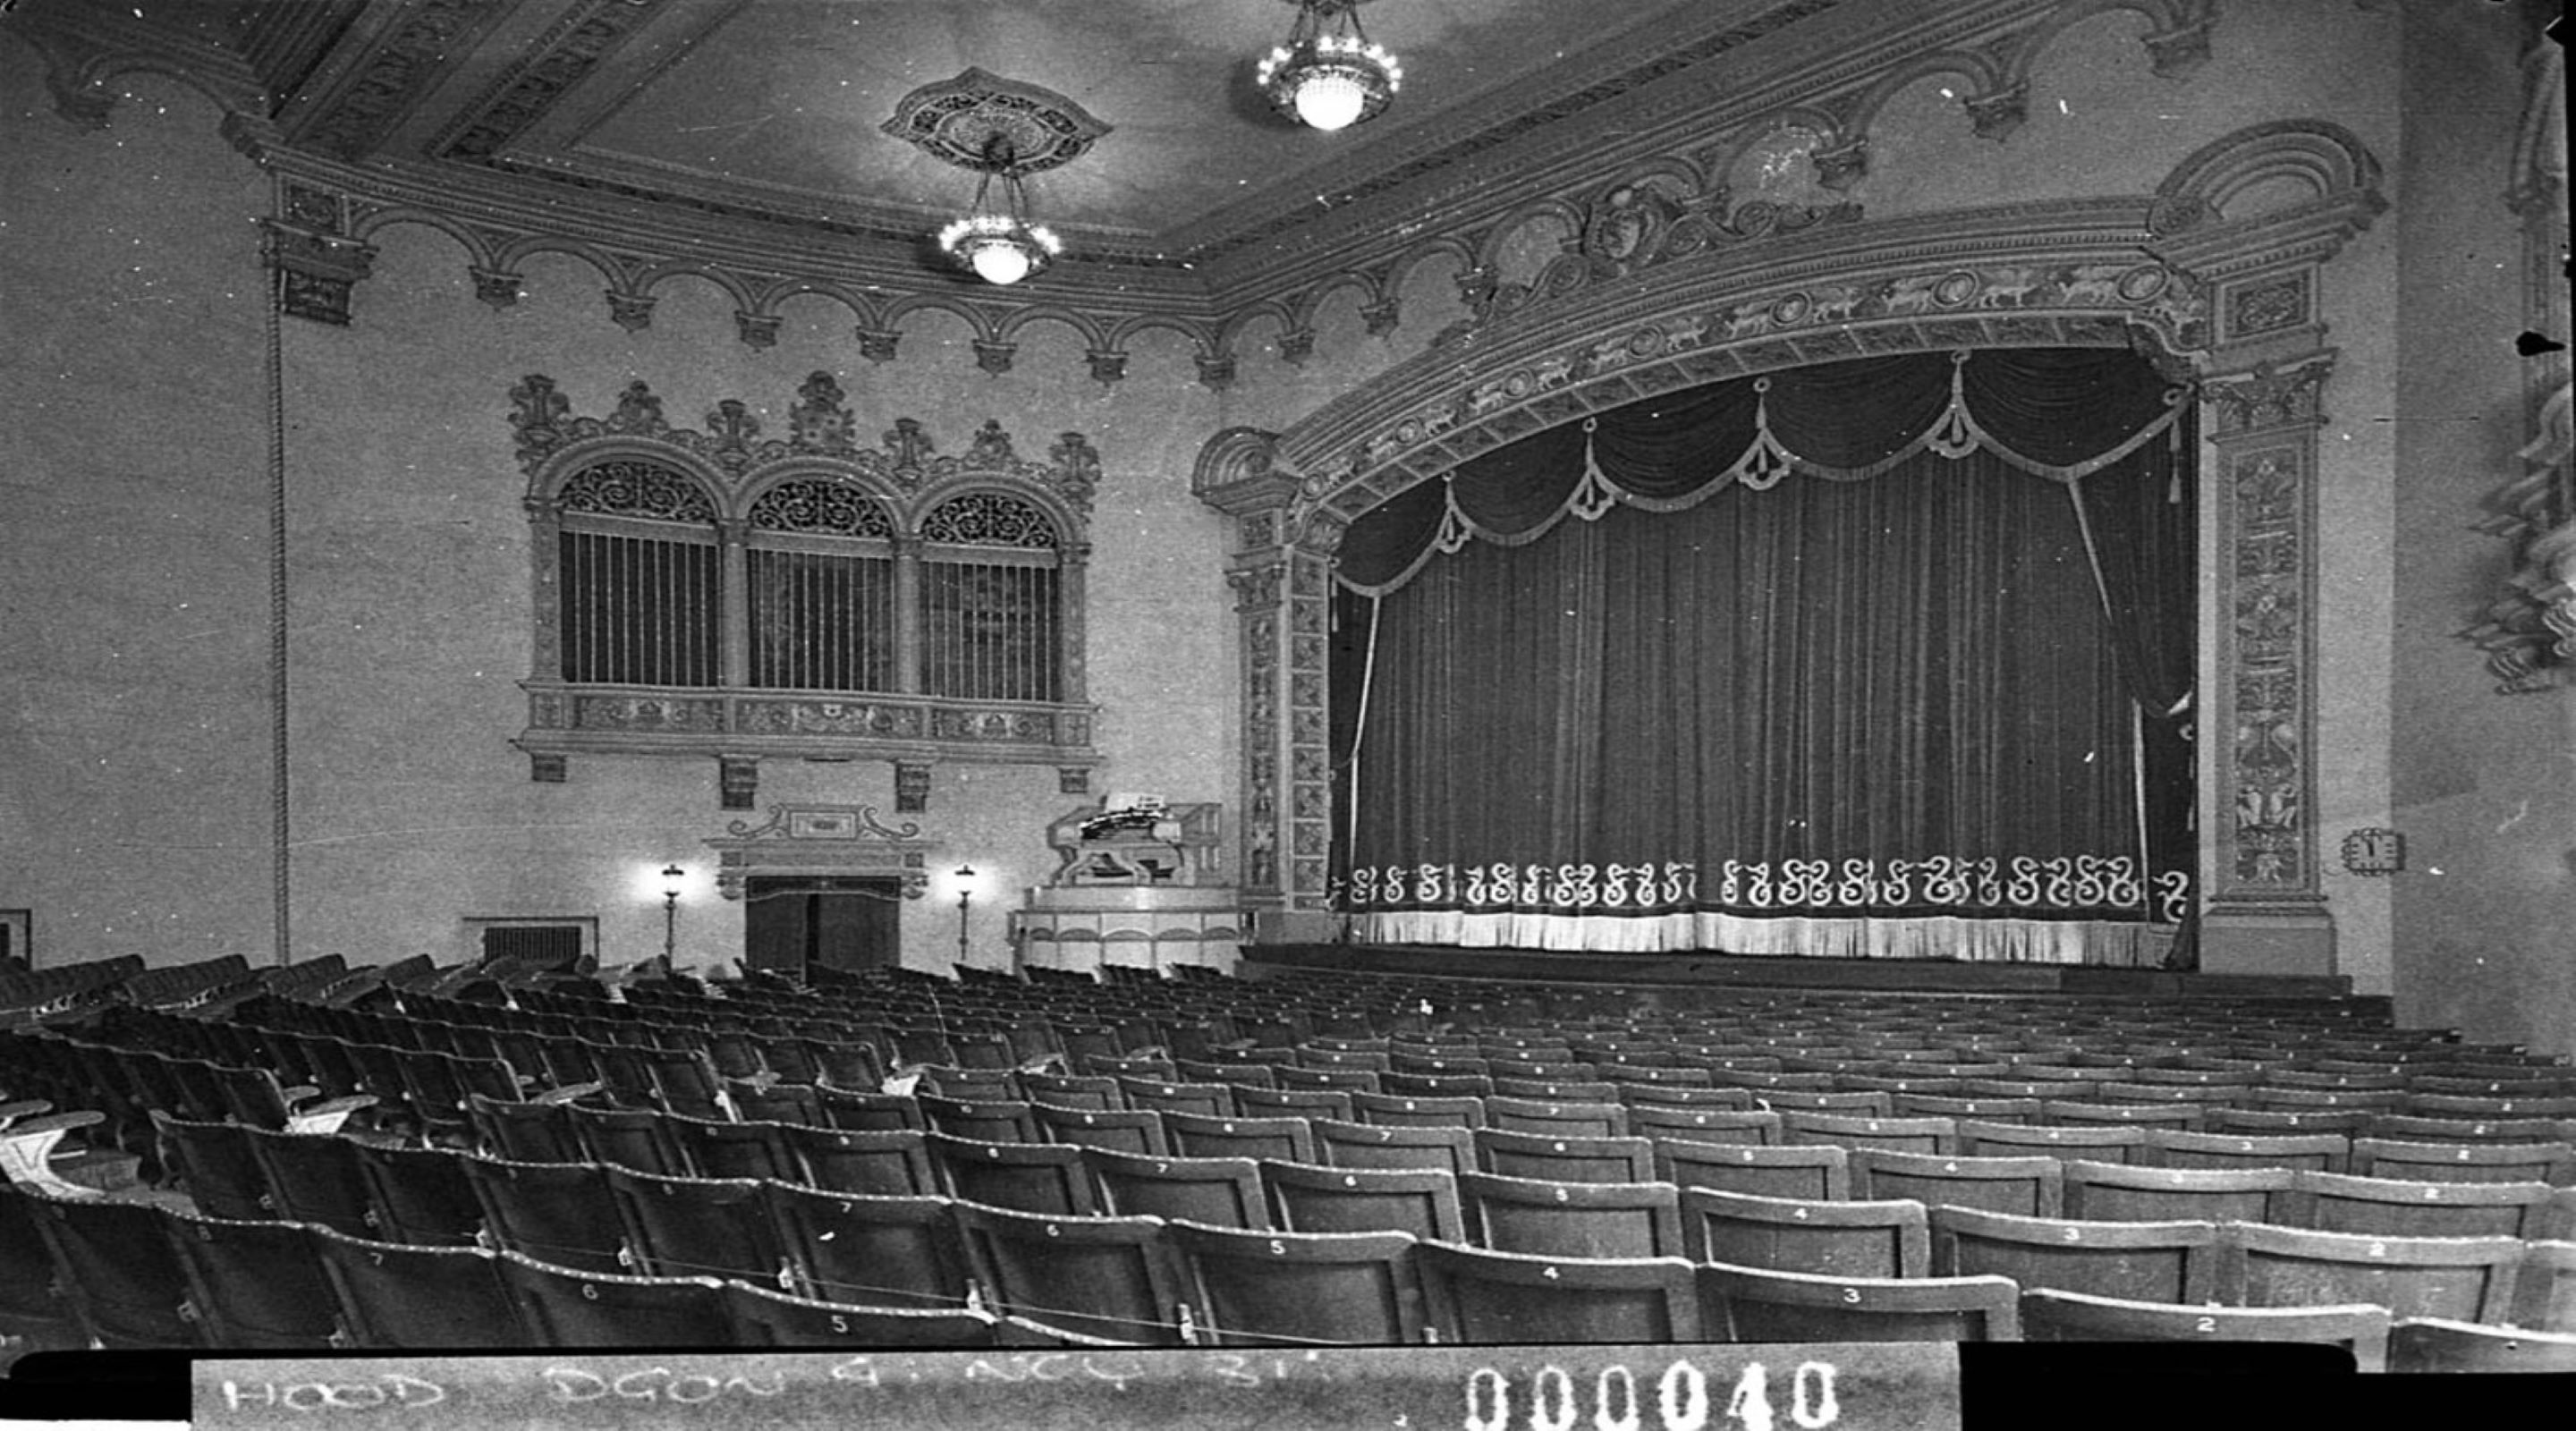 Stalls and proscenium, Roxy Theatre, Parramatta. Photo from the Collections of the State Library of New South Wales.